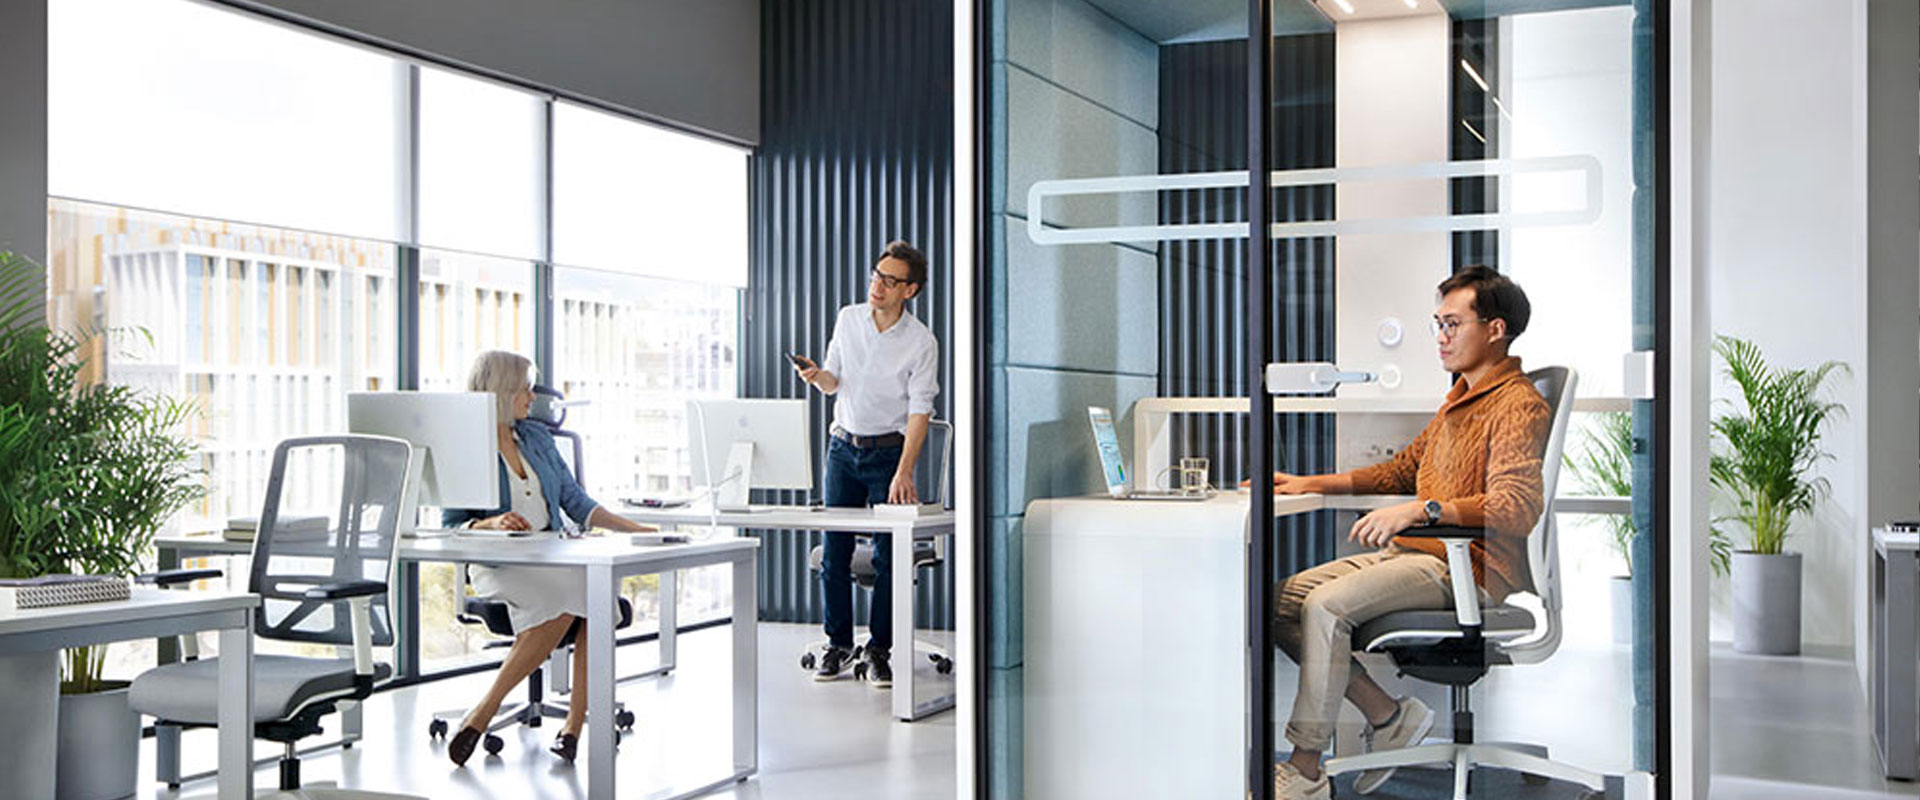 How to use office pods to improve employee morale and engagement